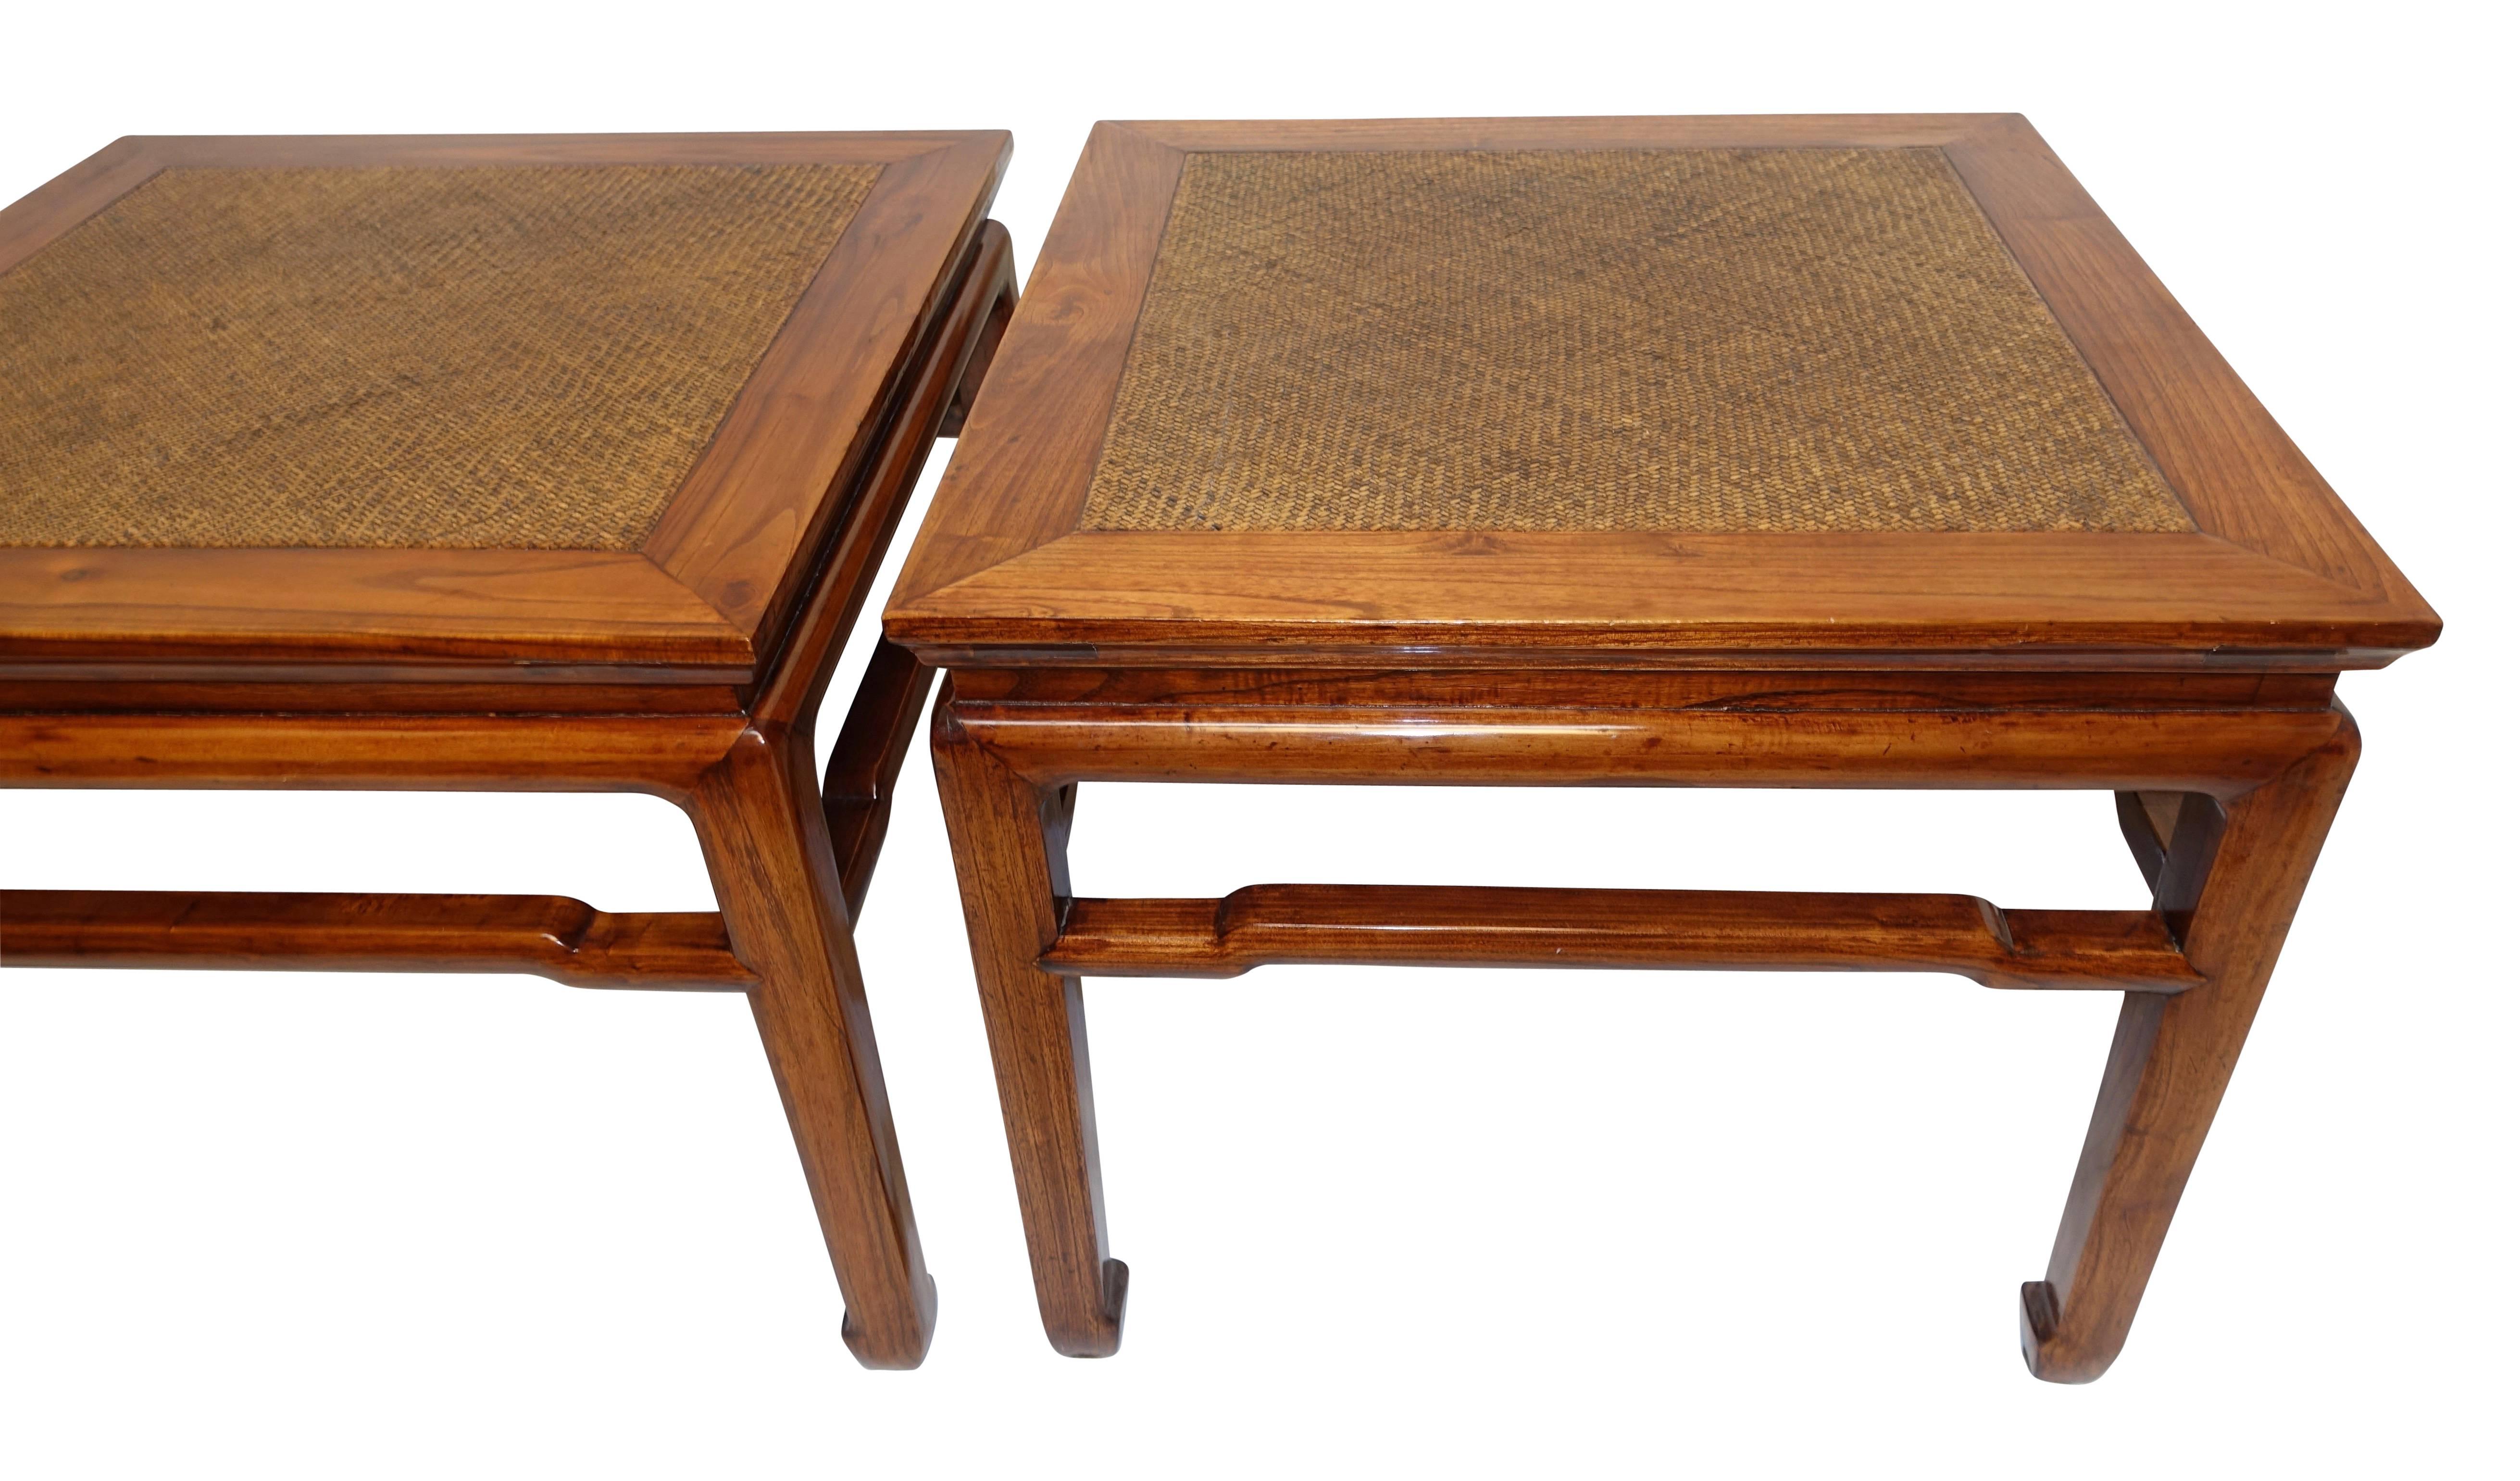 Pair of Chinese Side or End Tables with Woven Panels, Mid-19th Century 6